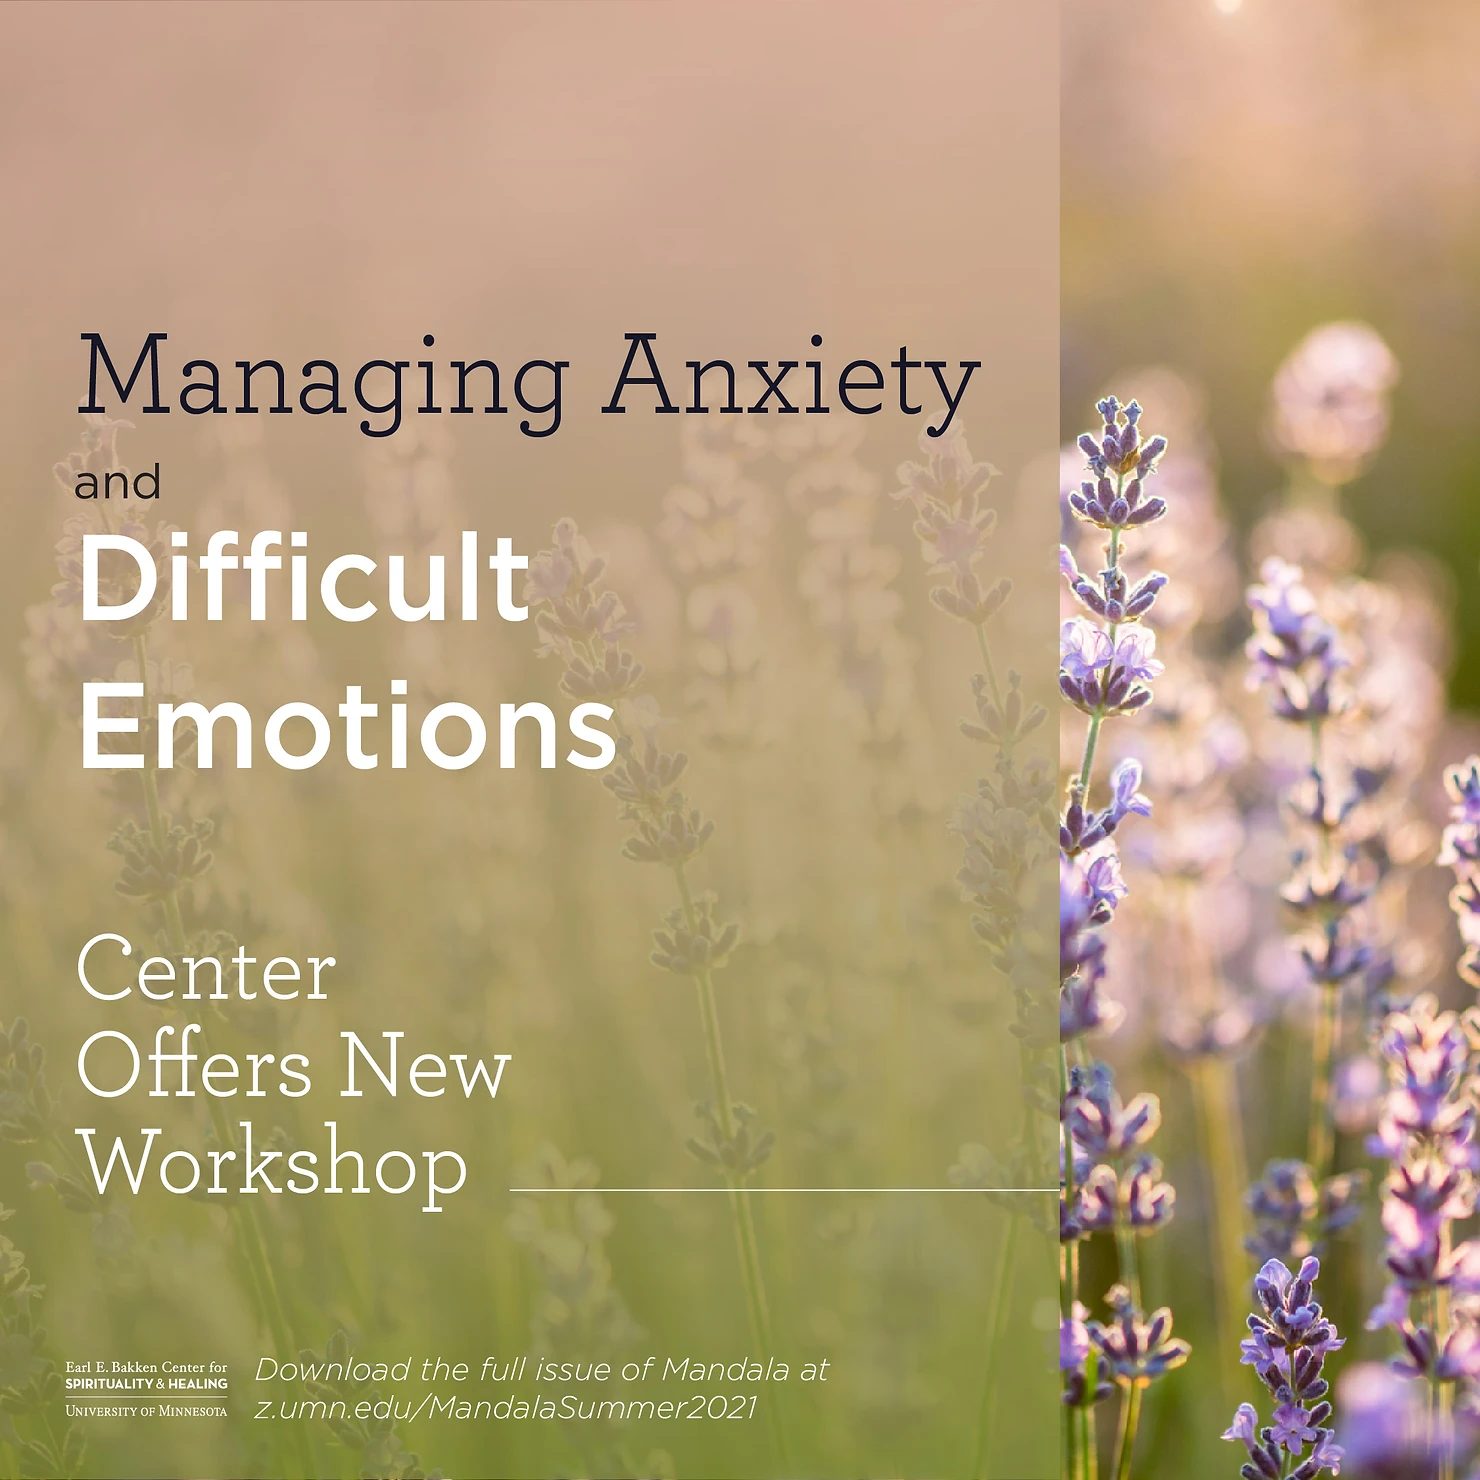 The text "managing anxiety and difficult emotions" over the image of a wildflower in a field 